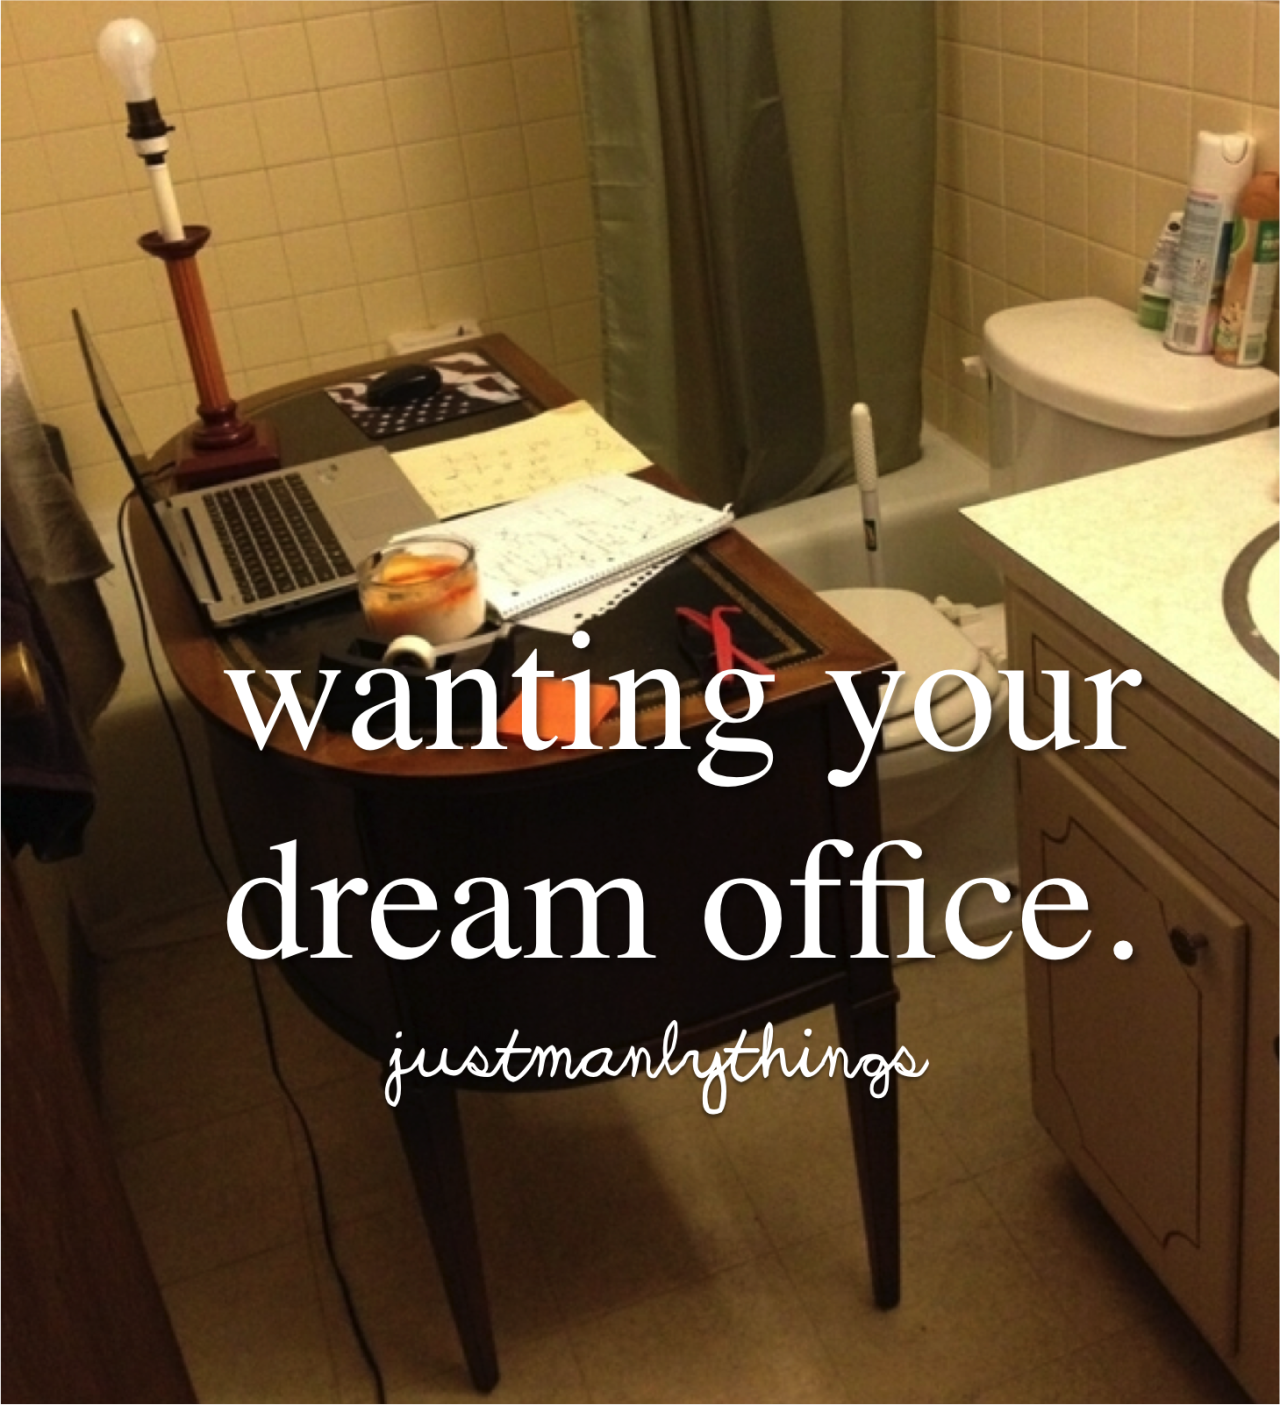 easy for those who dream - wanting your dream office. justmanlythinge